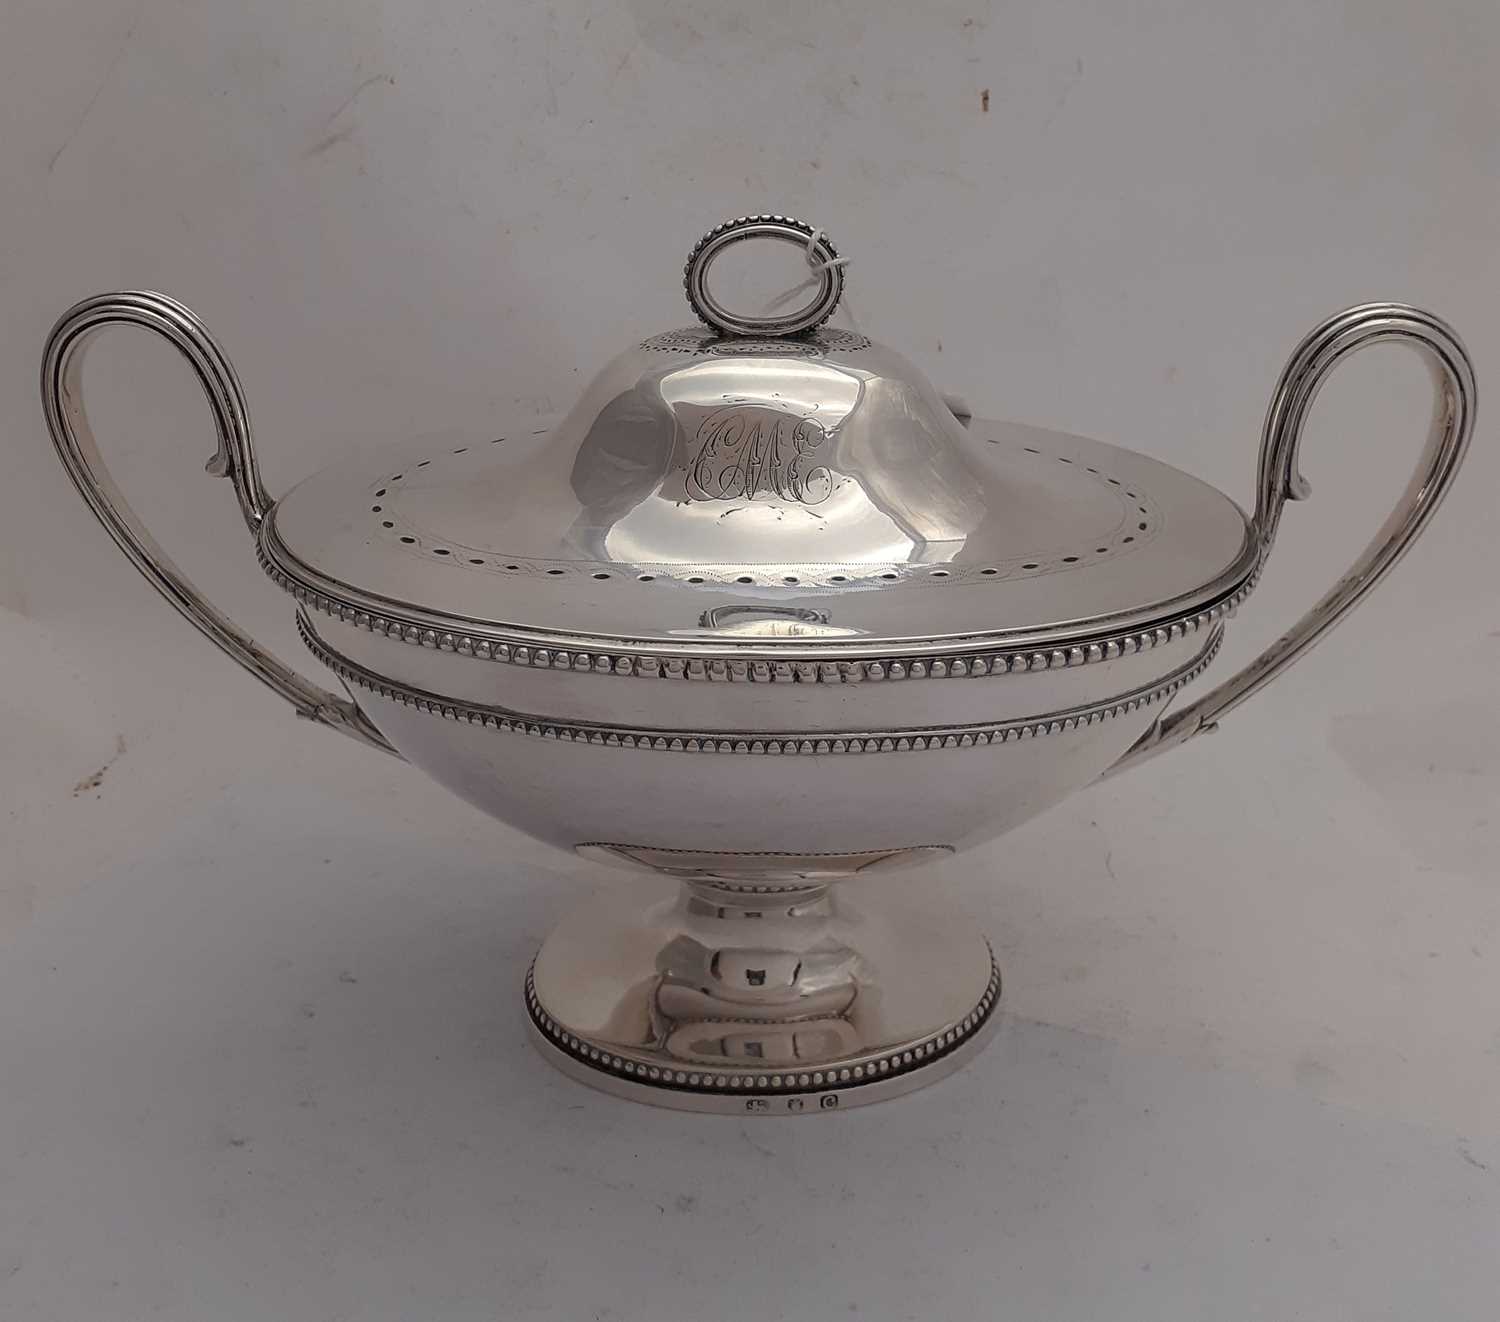 A Pair of George III Silver Sauce-Tureens and Covers, by Robert Hennell, London, 1782 - Image 15 of 17